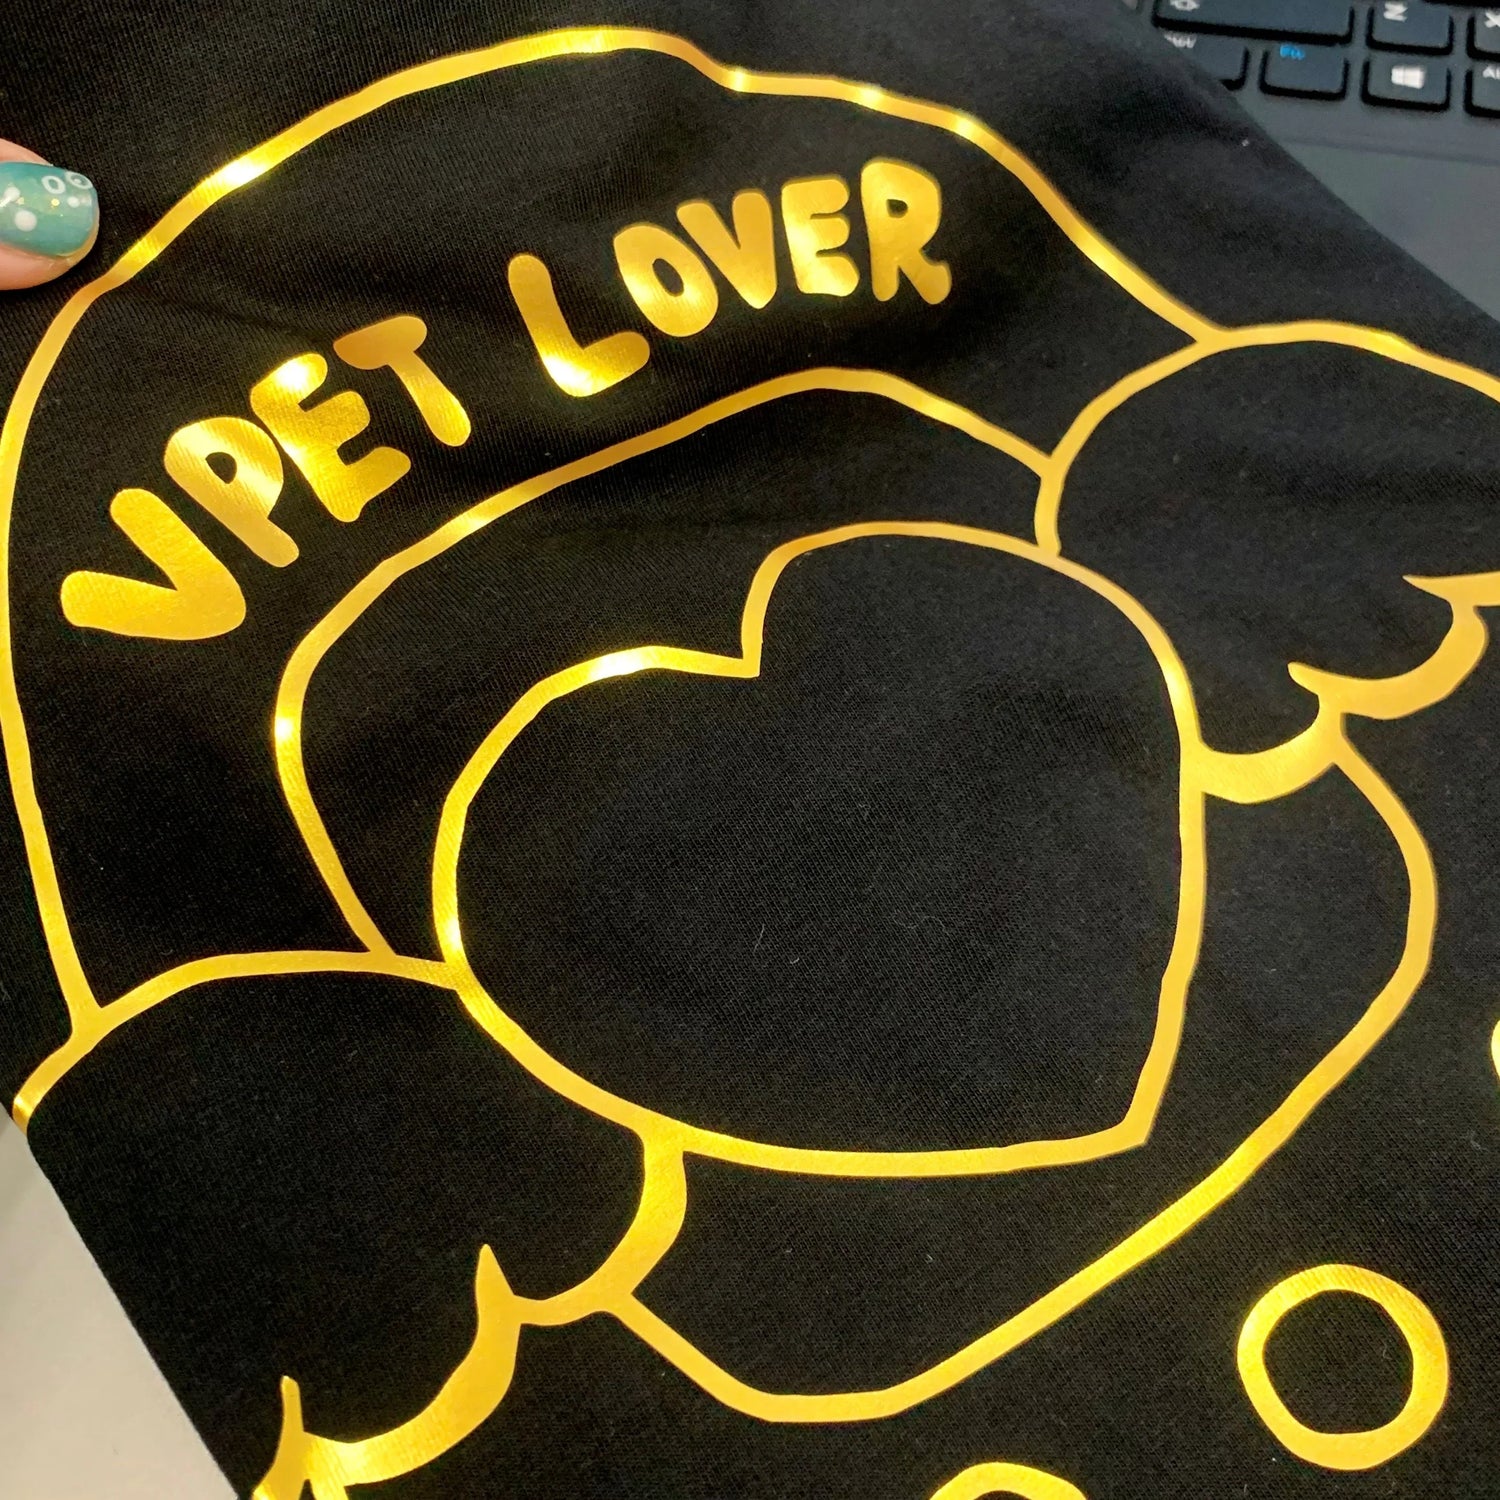 "V-Pet Lover" Gold on Black Tee (CLEARANCE SALE!) Fuzzy N Chic